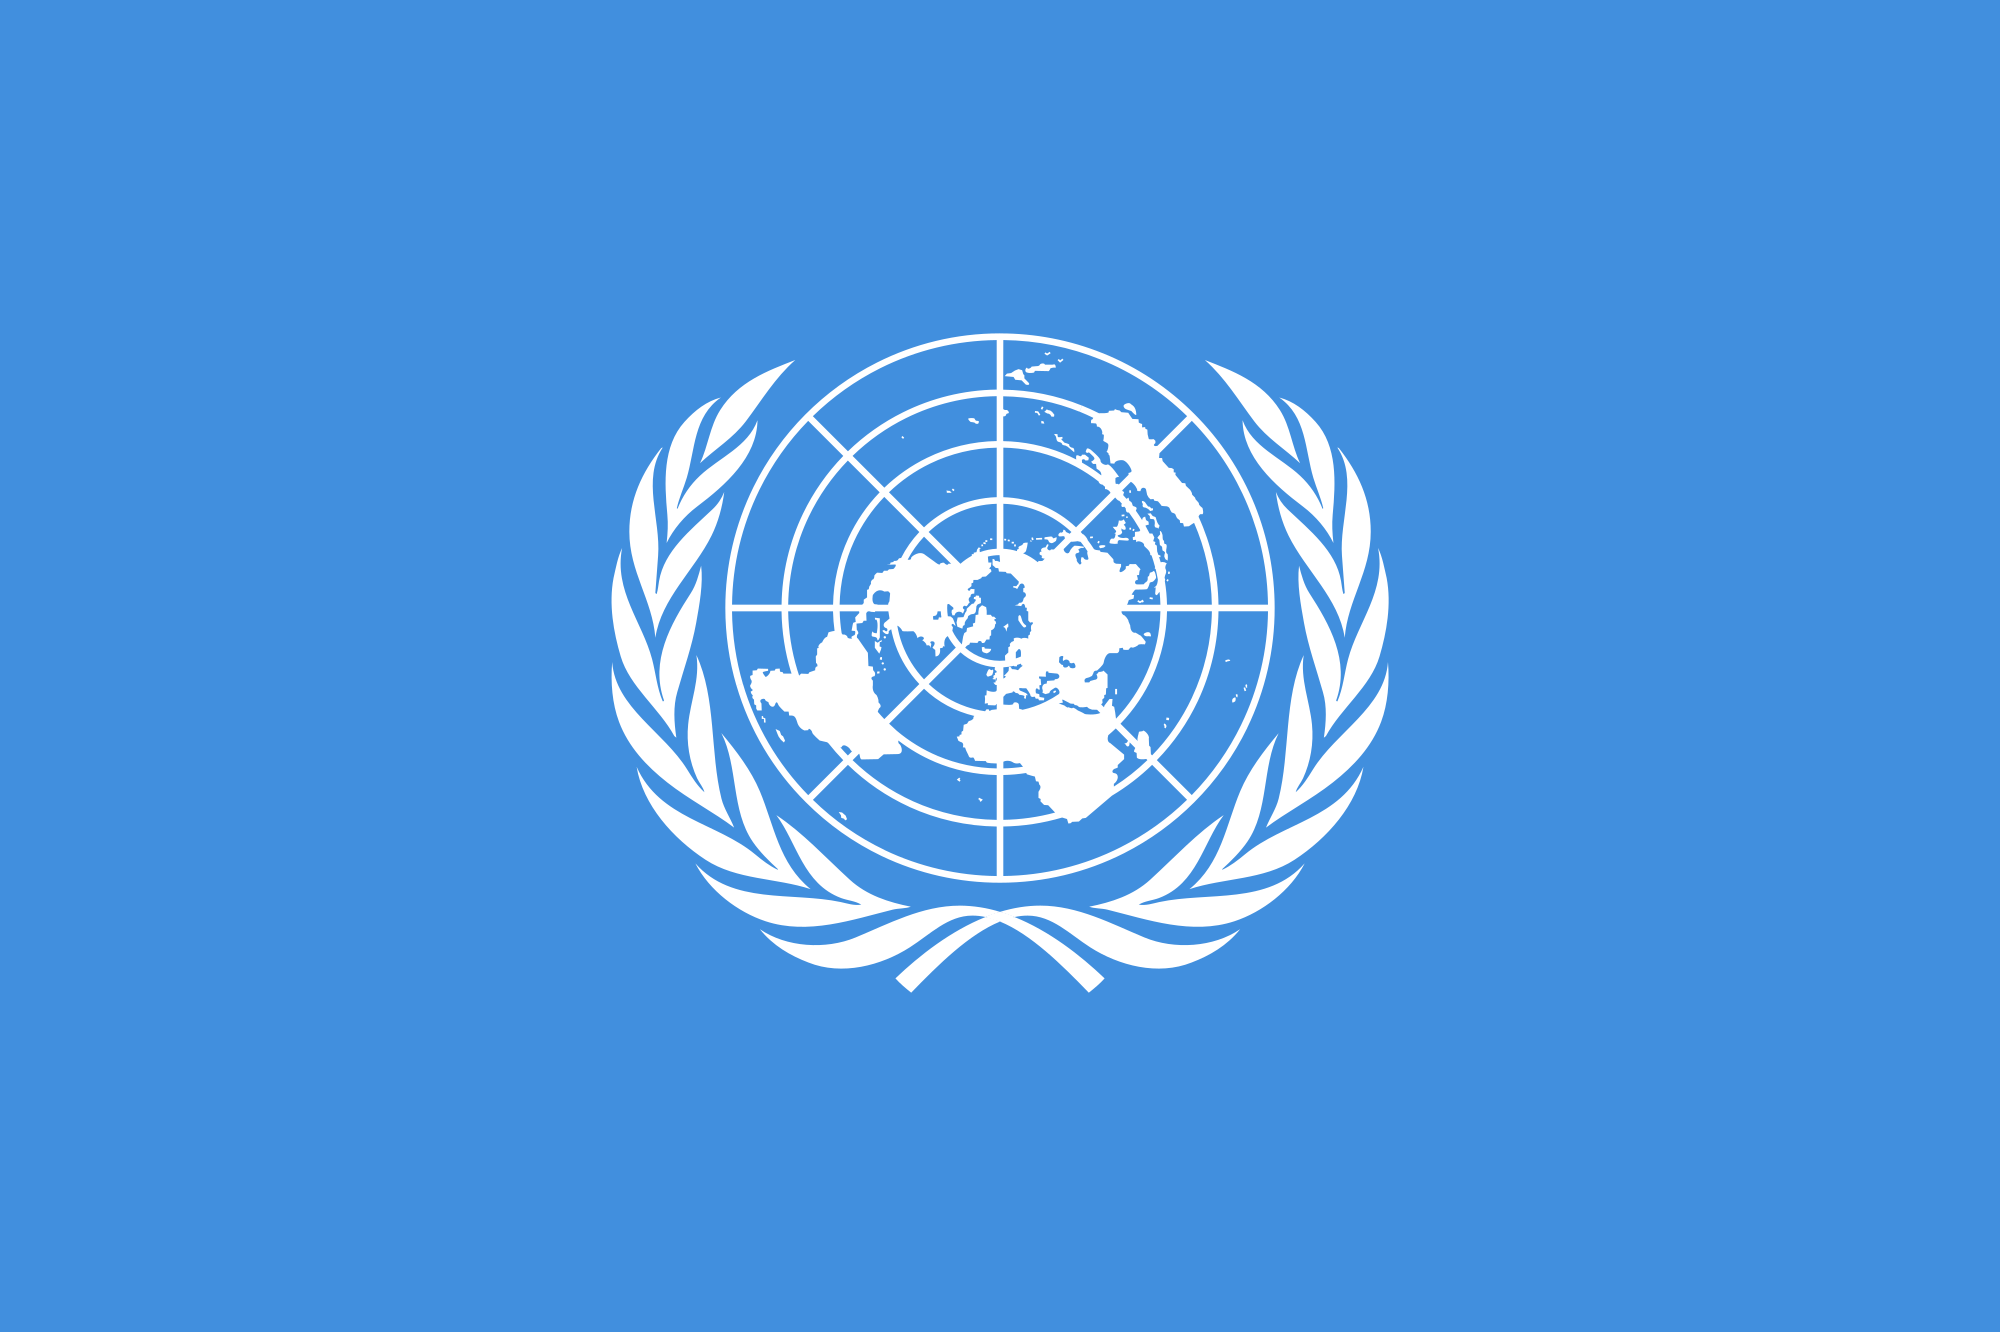 Old United Nations Logo - Flag of the United Nations